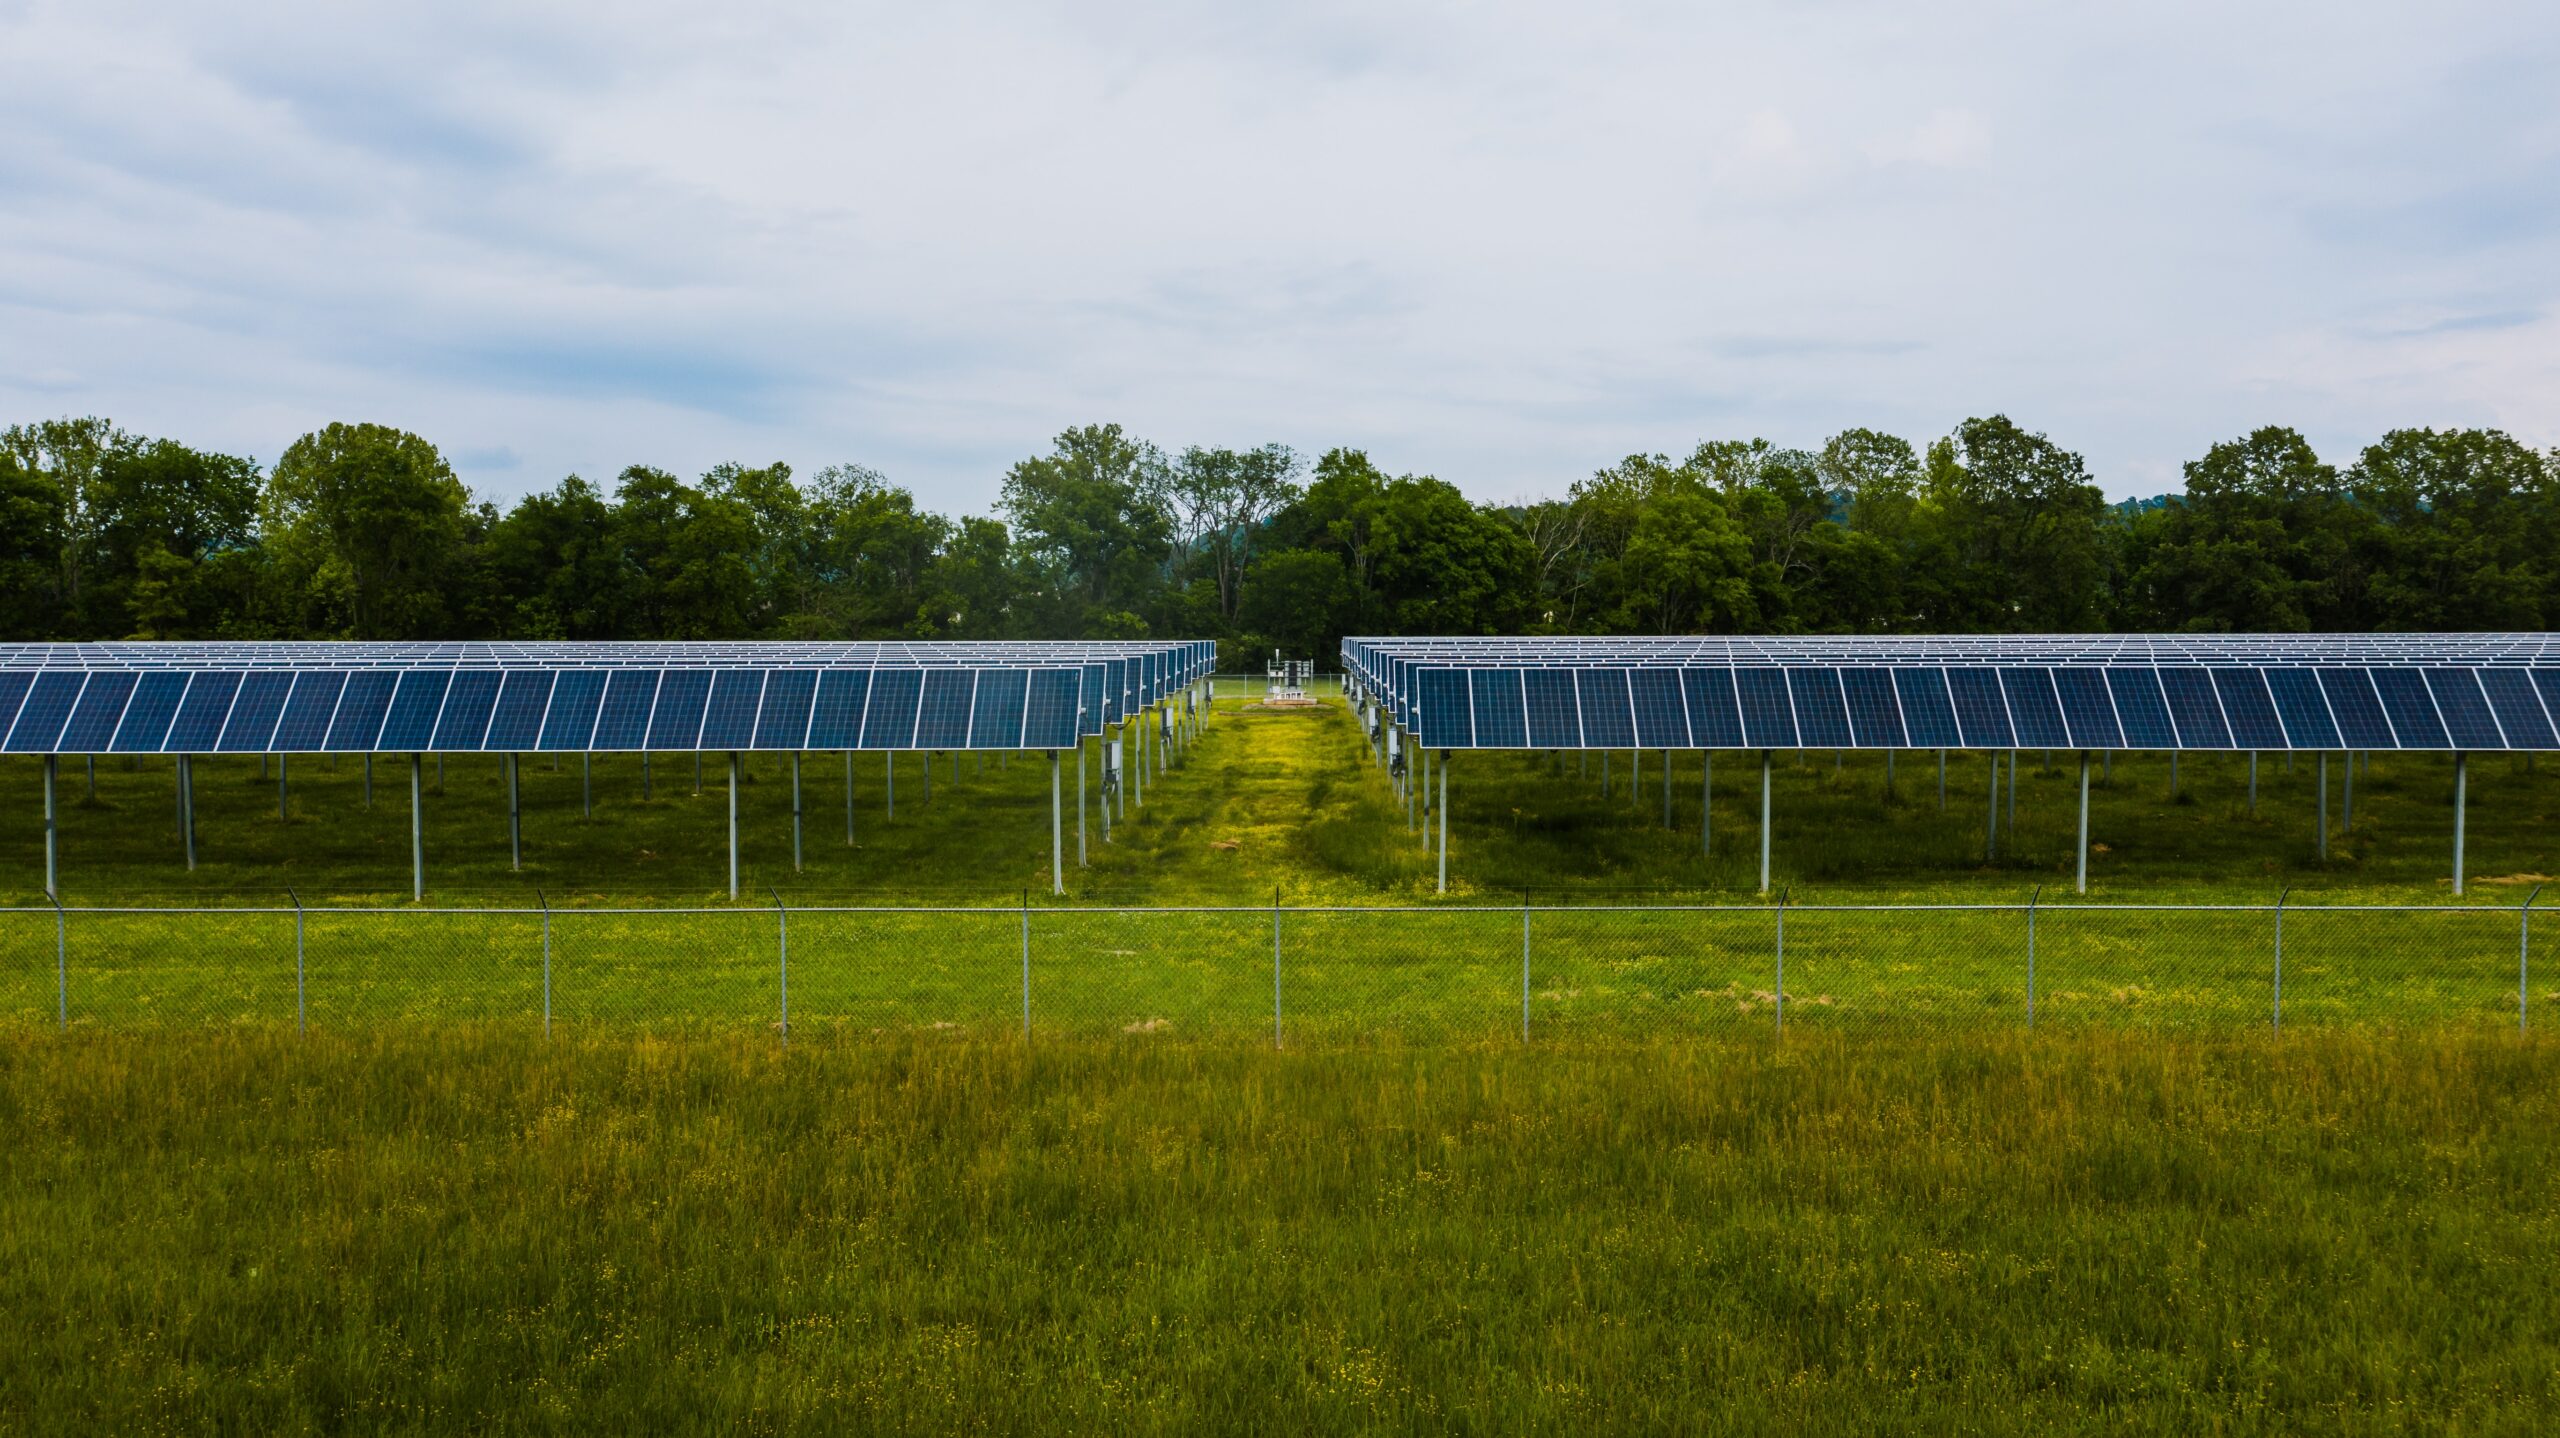 An array of solar panels in a grassy field meant to symbolize how independent community solar can help Indiana move toward a healthier, cleaner future